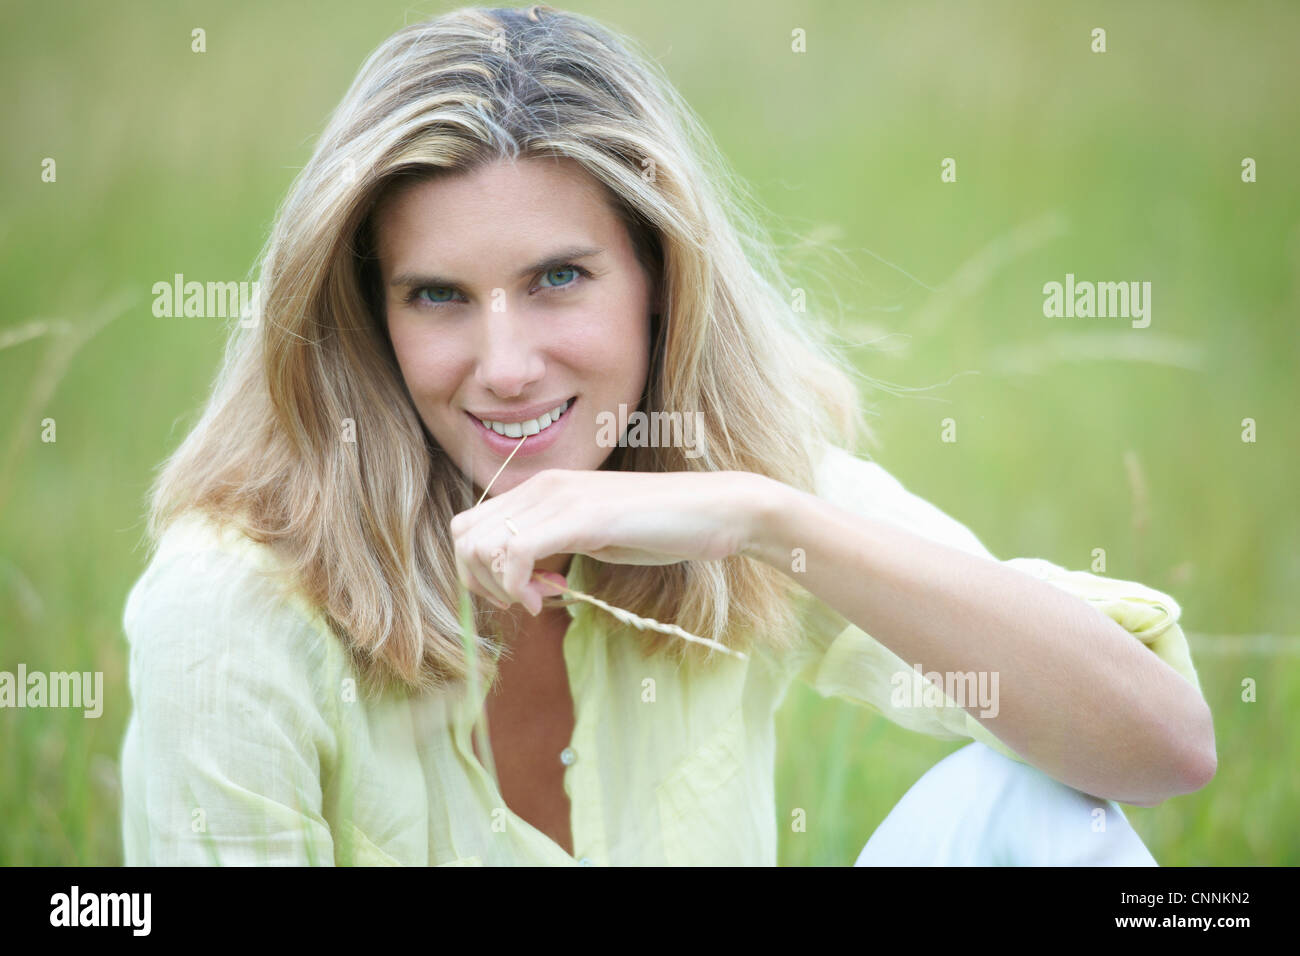 Smiling woman sitting in wheat field Banque D'Images